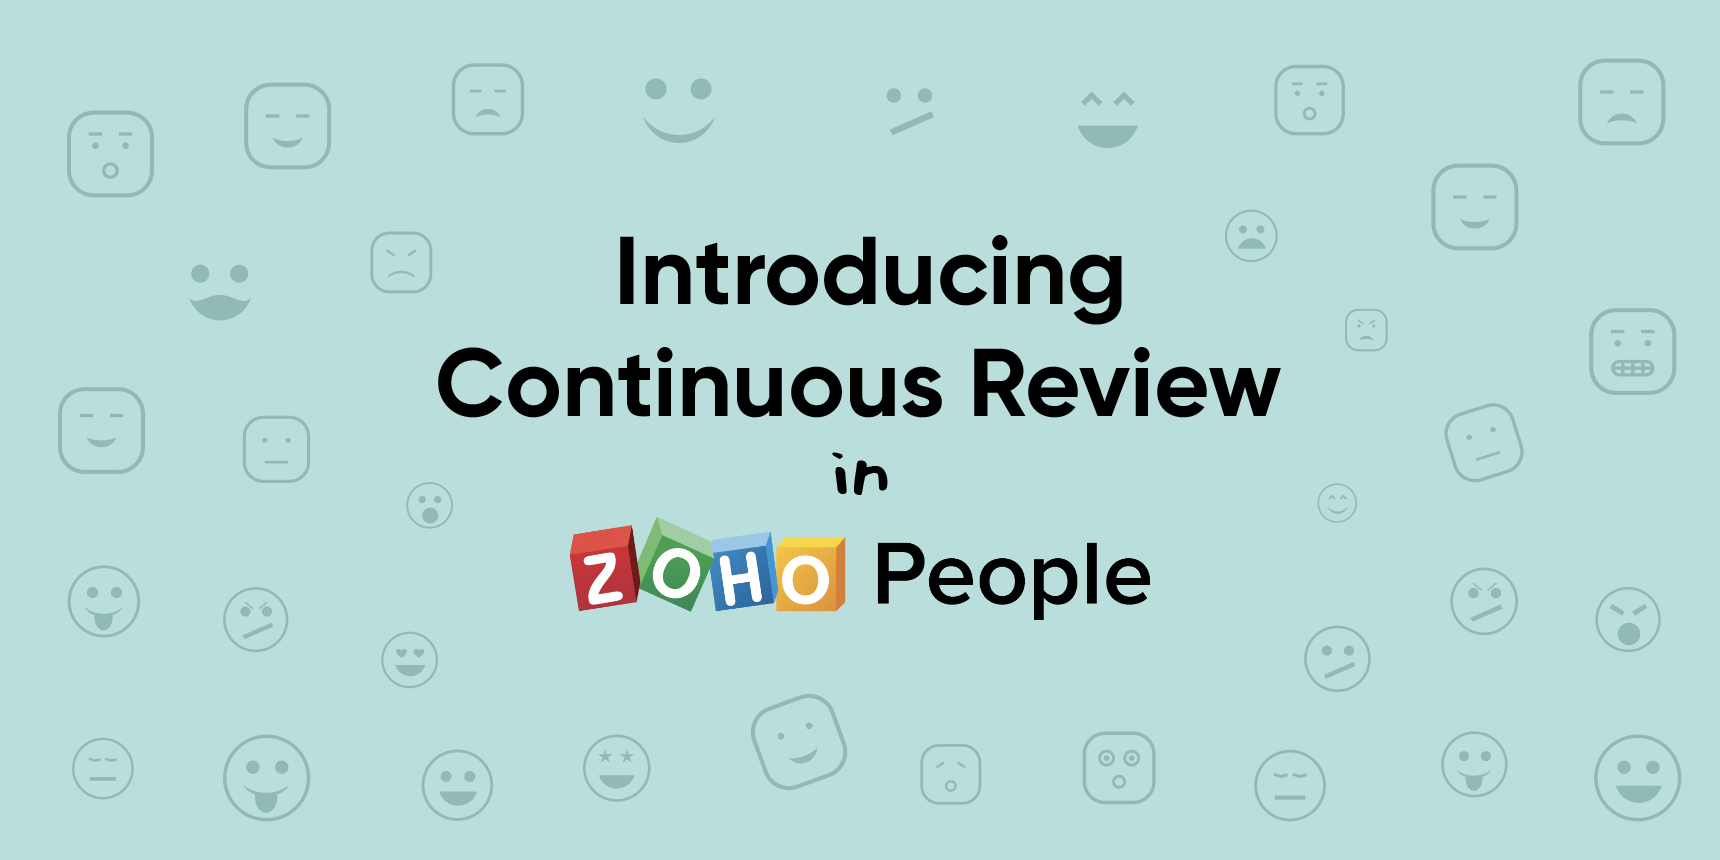 Continuous Review in Zoho People